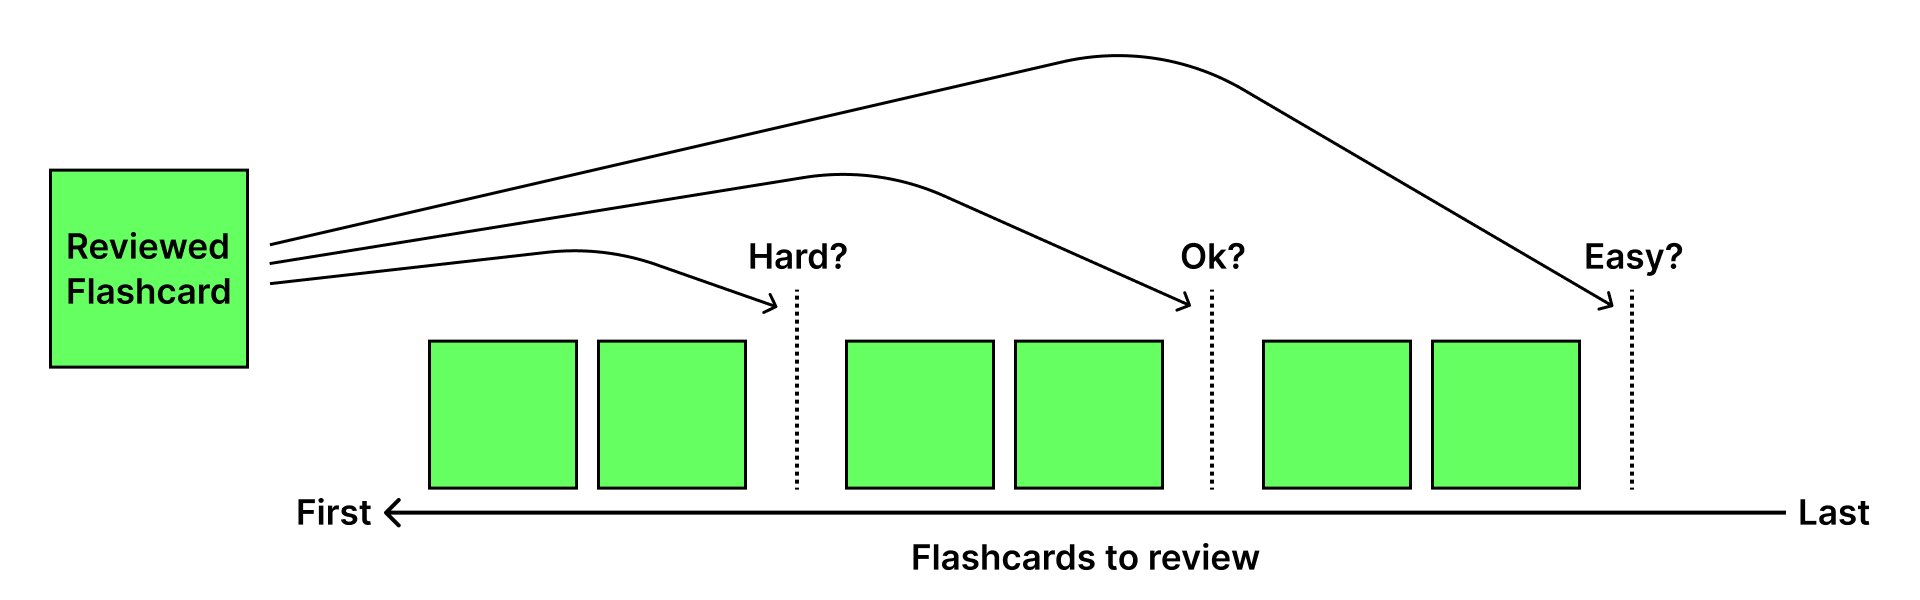 An illustration of how flashcards are spaced differently on Retinello depending on how hard you find them.